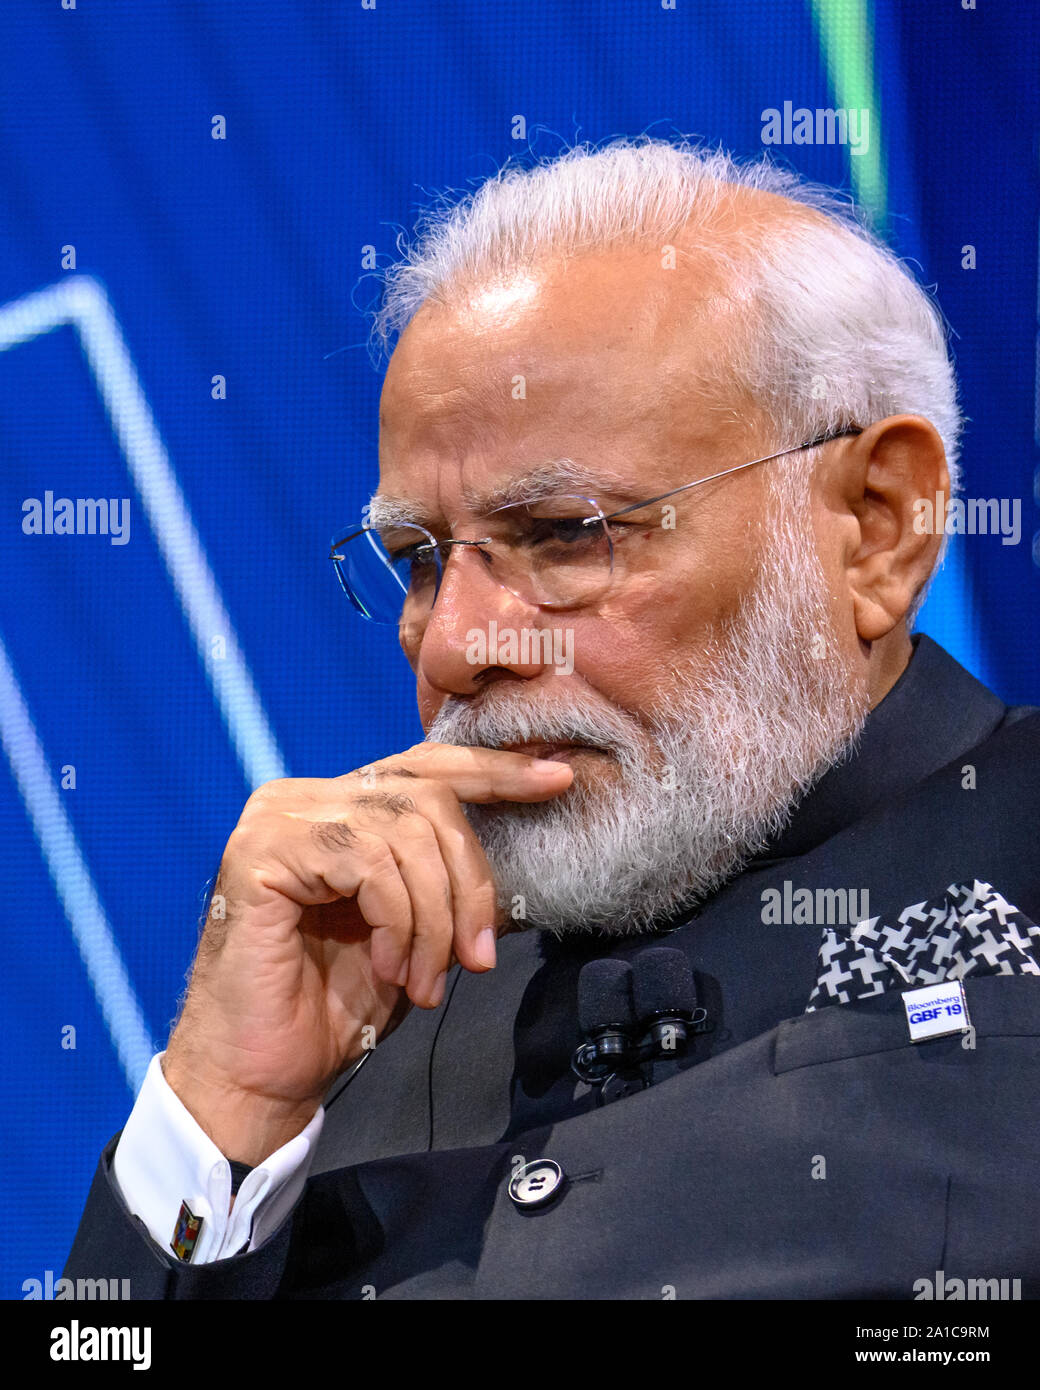 New York, USA. 25th Sep, 2019. Indian Prime Minister Narendra Modi ponders a question at the Bloomberg Global Business Forum 2019 at the Plaza hotel in New York City. Credit: Enrique Shore/Alamy Live News Stock Photo